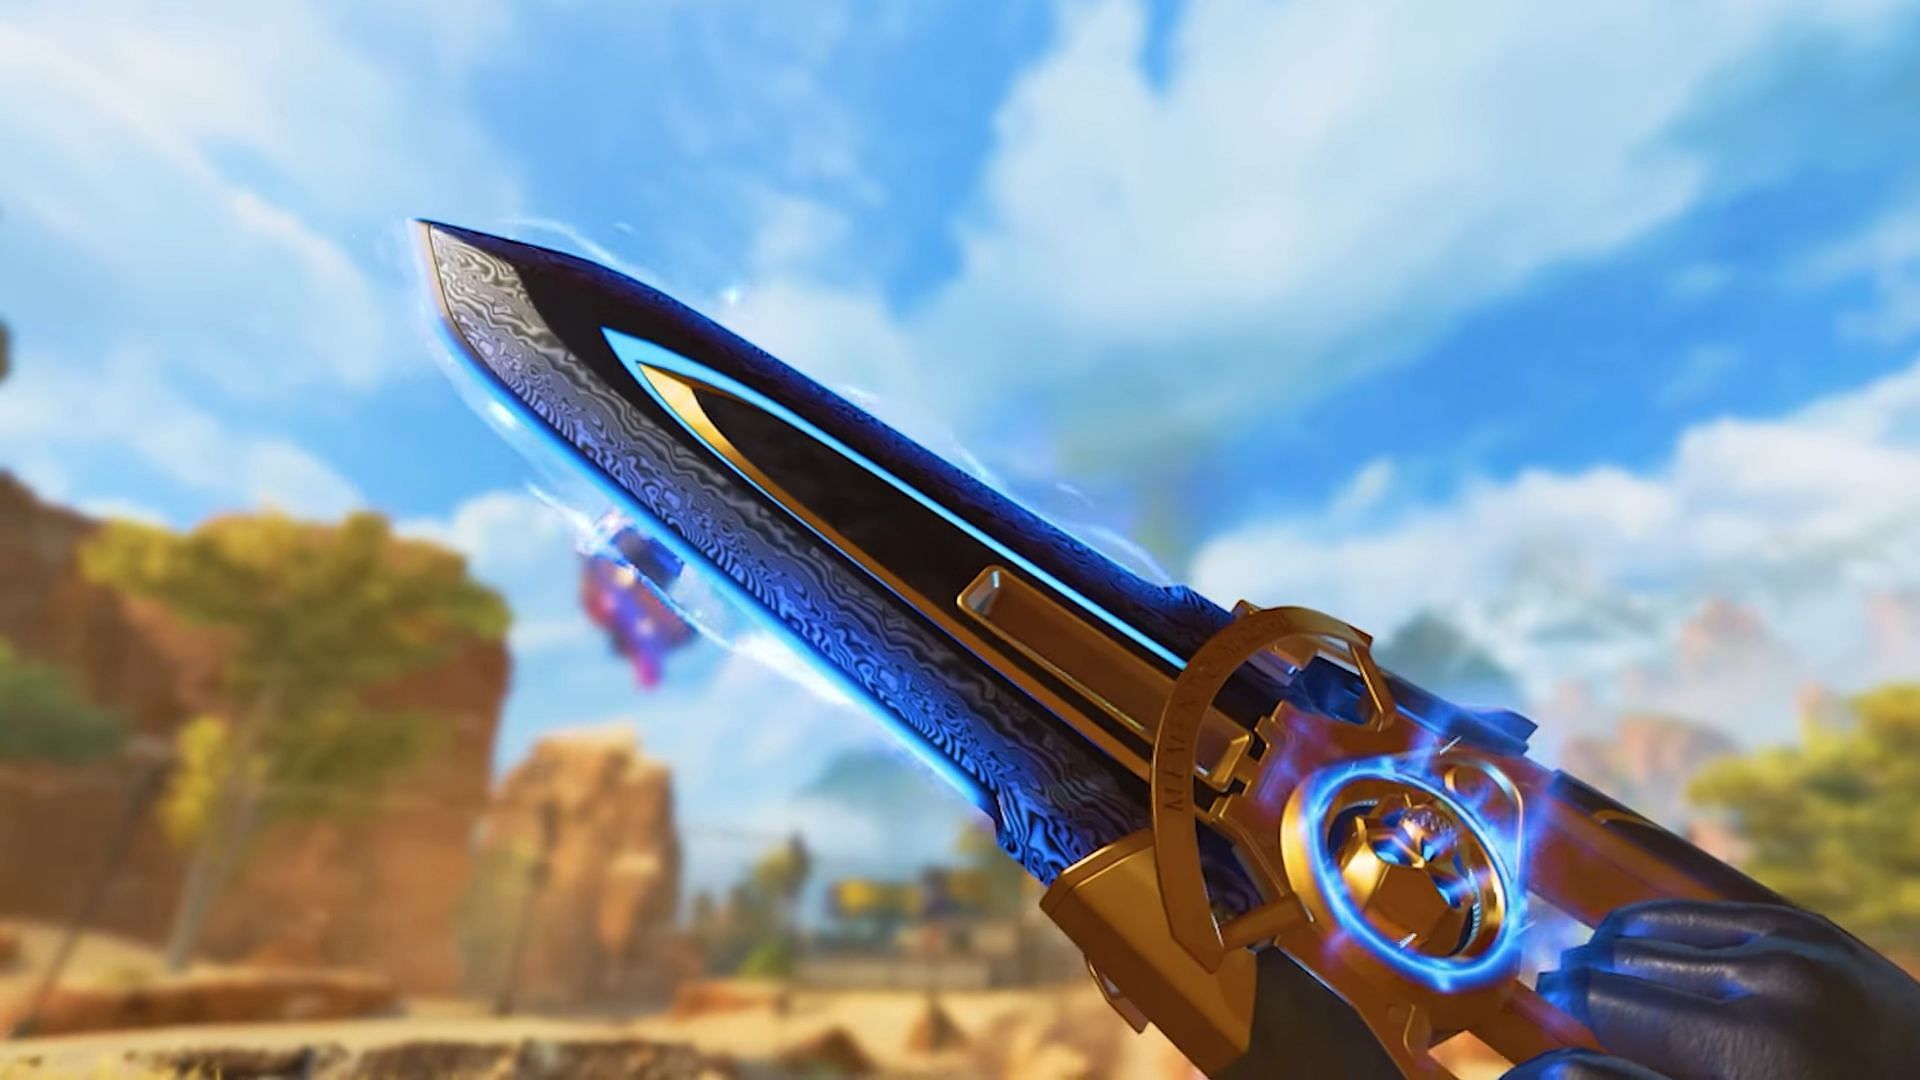 Cobalt Katar Mythic Artifact in Apex Legends (Image via Electronic Arts || RossTheeSquirrel)